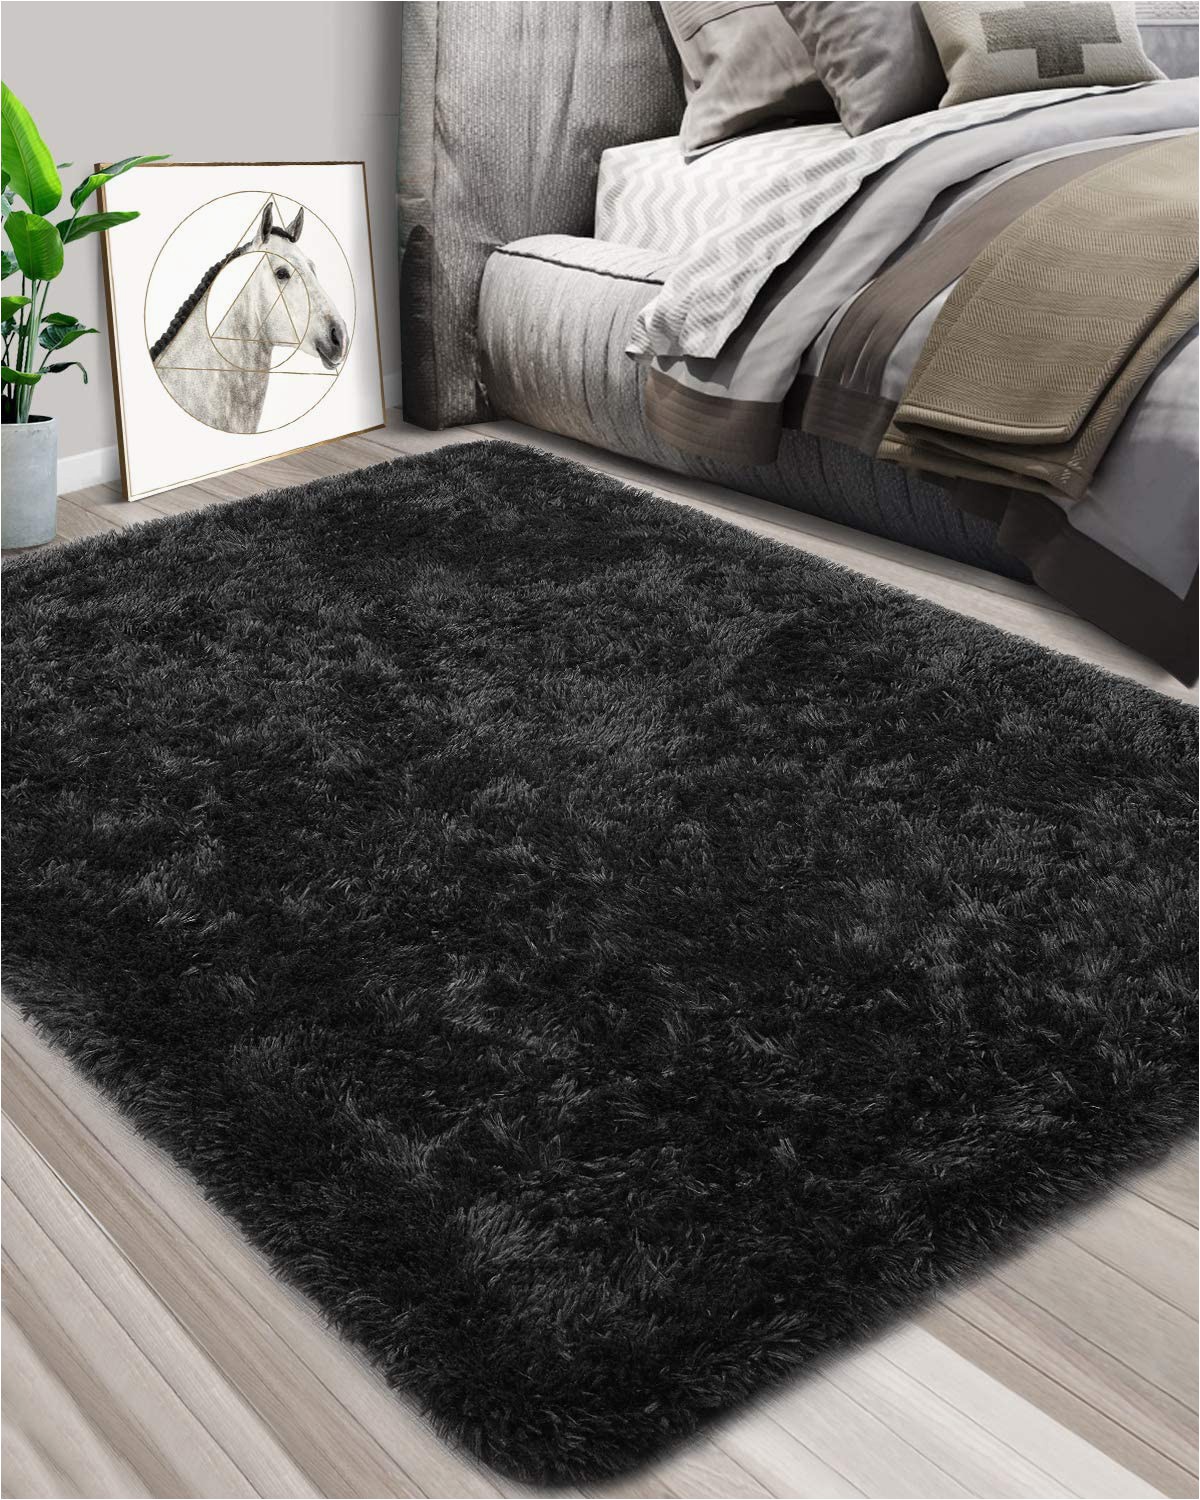 Plush area Rugs for Bedroom Amazon Foxmas Ultra soft Fluffy area Rugs for Bedroom